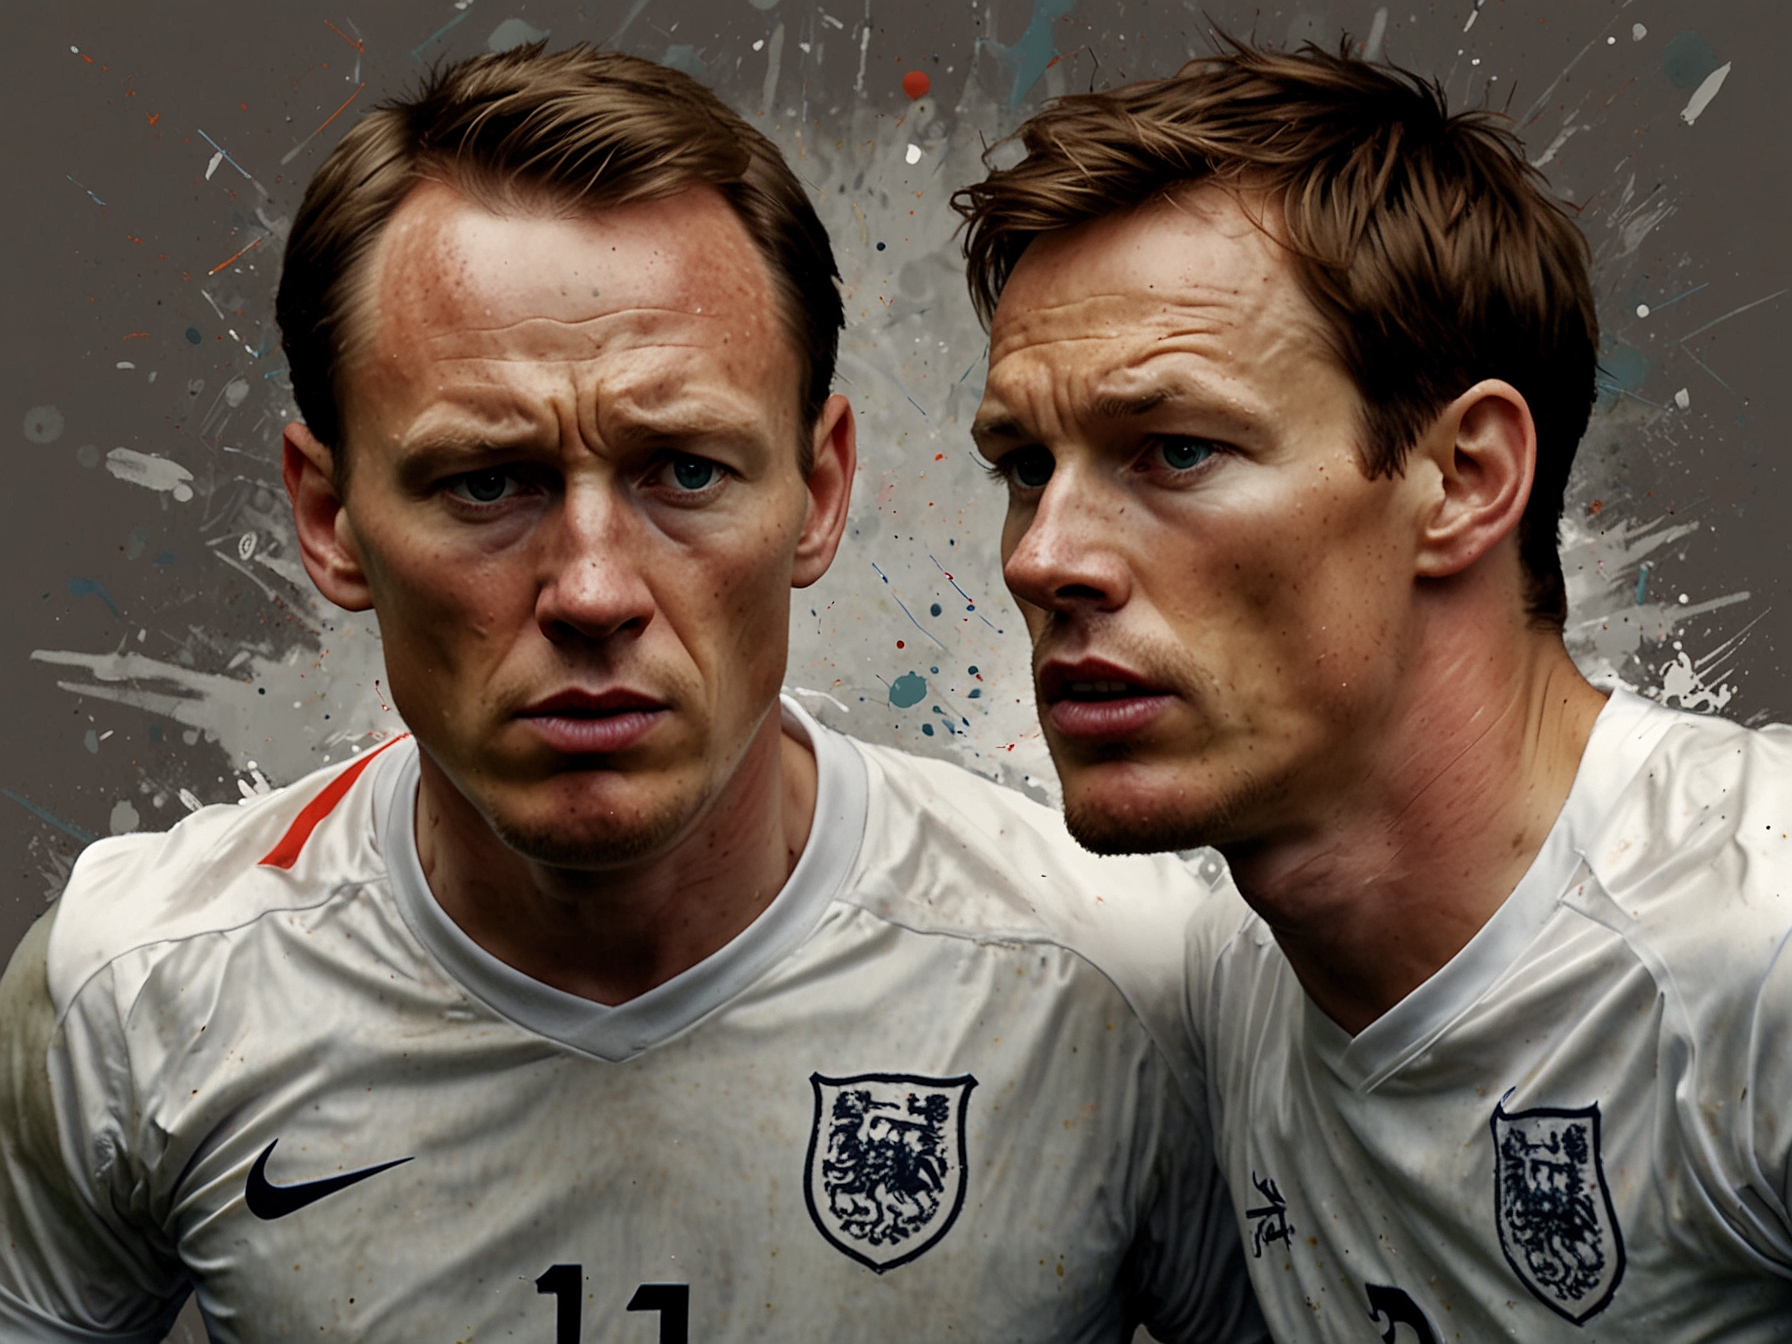 A visual depiction of the struggle and competition faced by talented English players like Lee Dixon and Scott Parker, representing their journey and the challenges of making it to major international events.